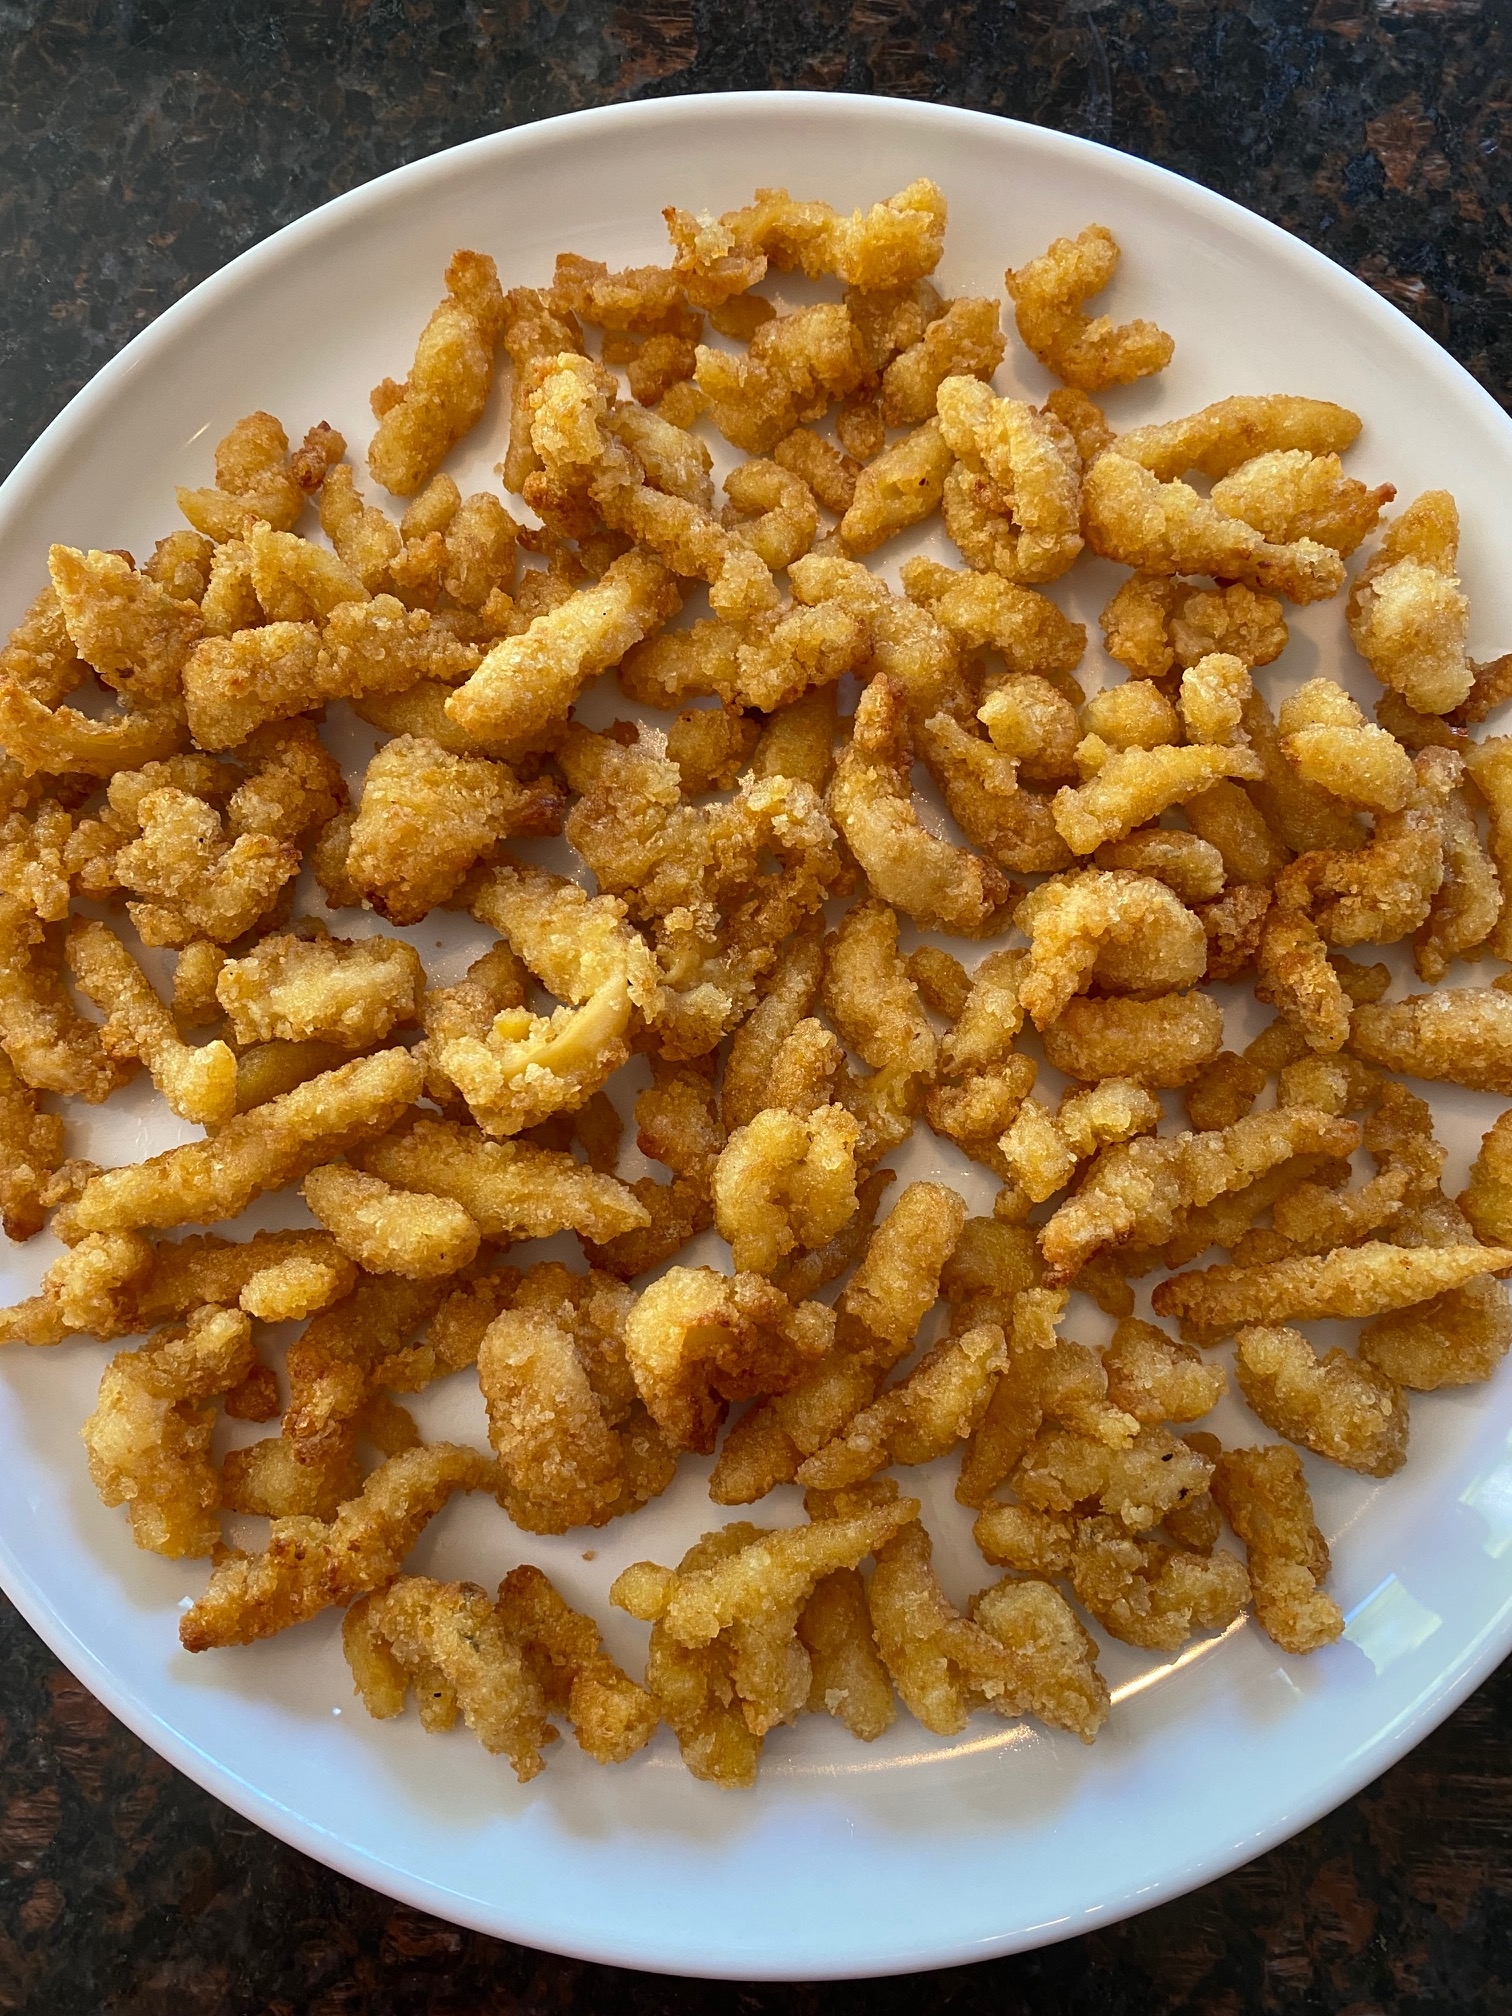 Plate of crispy air fried clam strips.